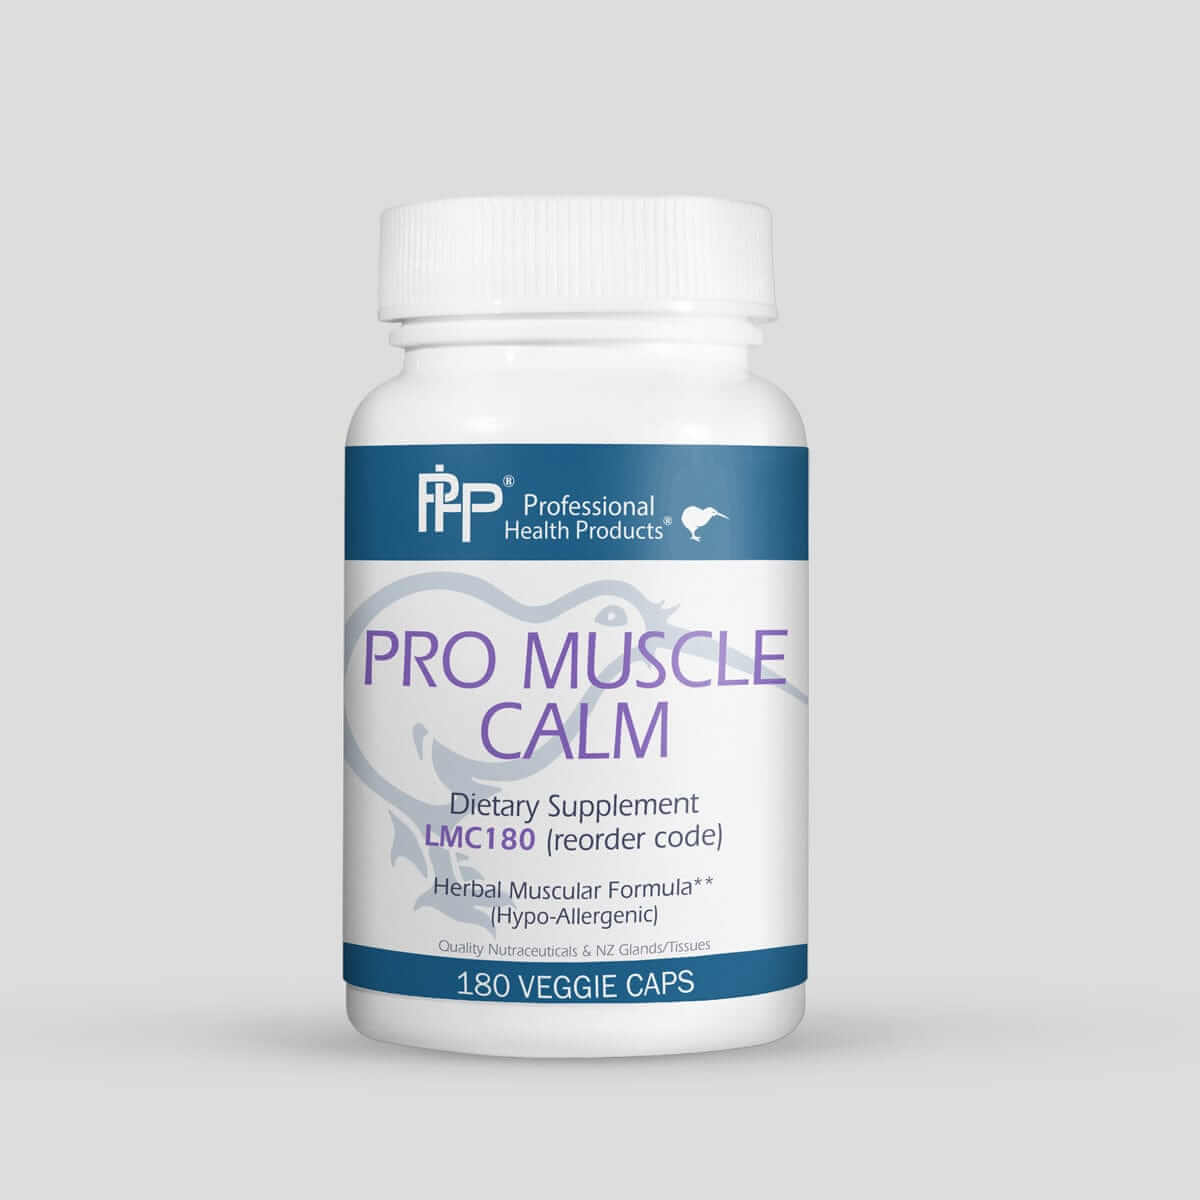 Pro Muscle Calm * Prof Health Products Supplement - Conners Clinic